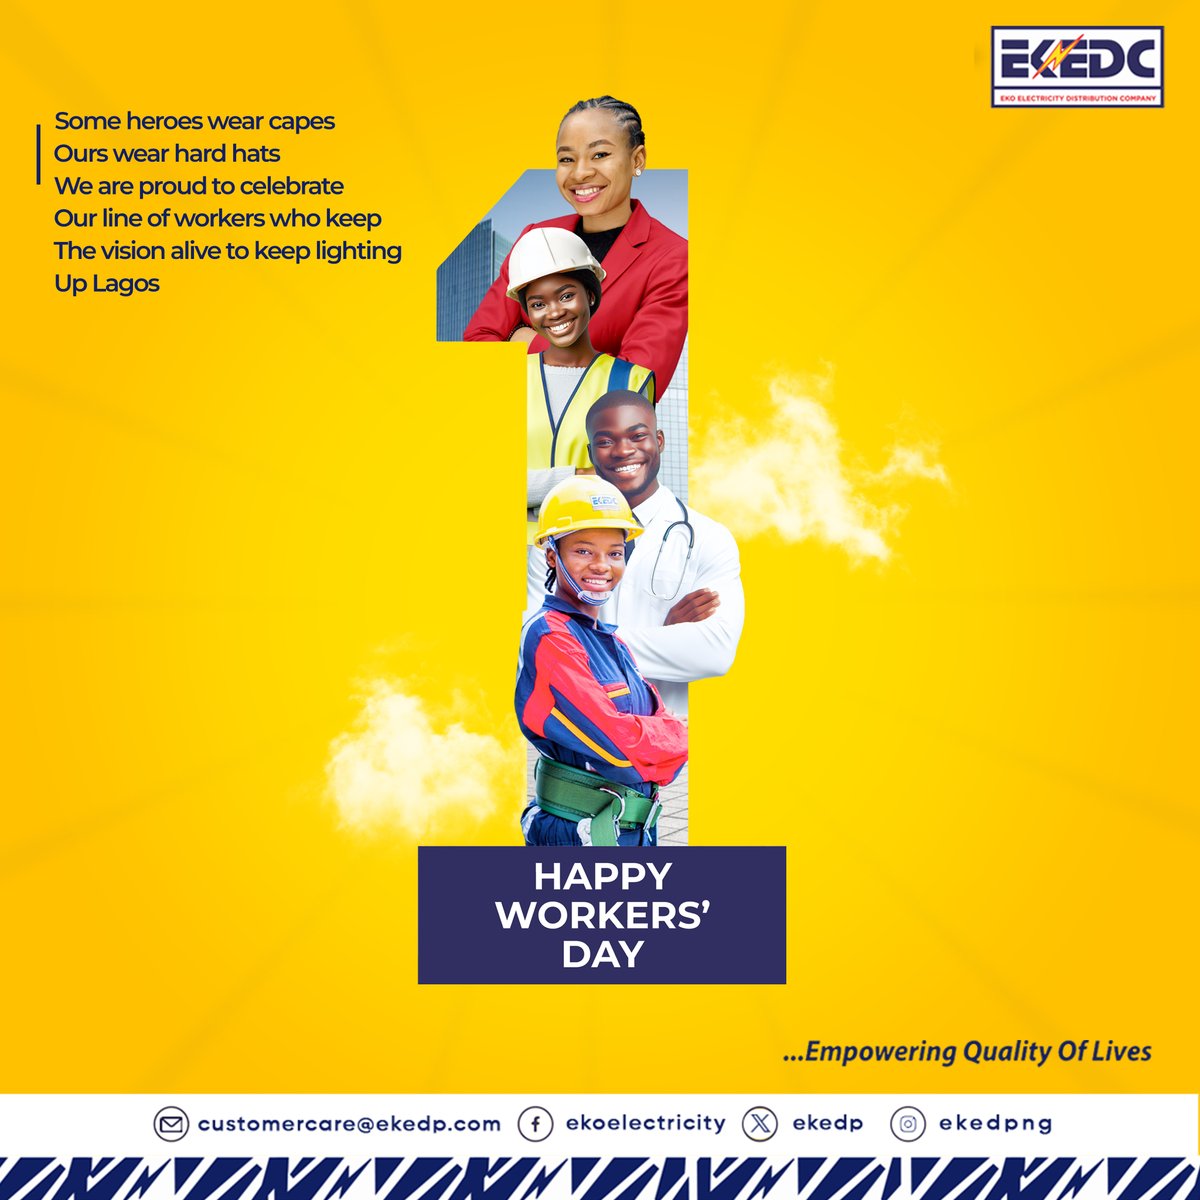 Some heroes wear capes, ours wear hard hats. We are proud to celebrate our line of workers who keep the vision alive to keep lighting up Lagos. Thank you for all you do. Happy Worker's Day #EKEDC #EmpoweringQualityofLives #WorkersDay